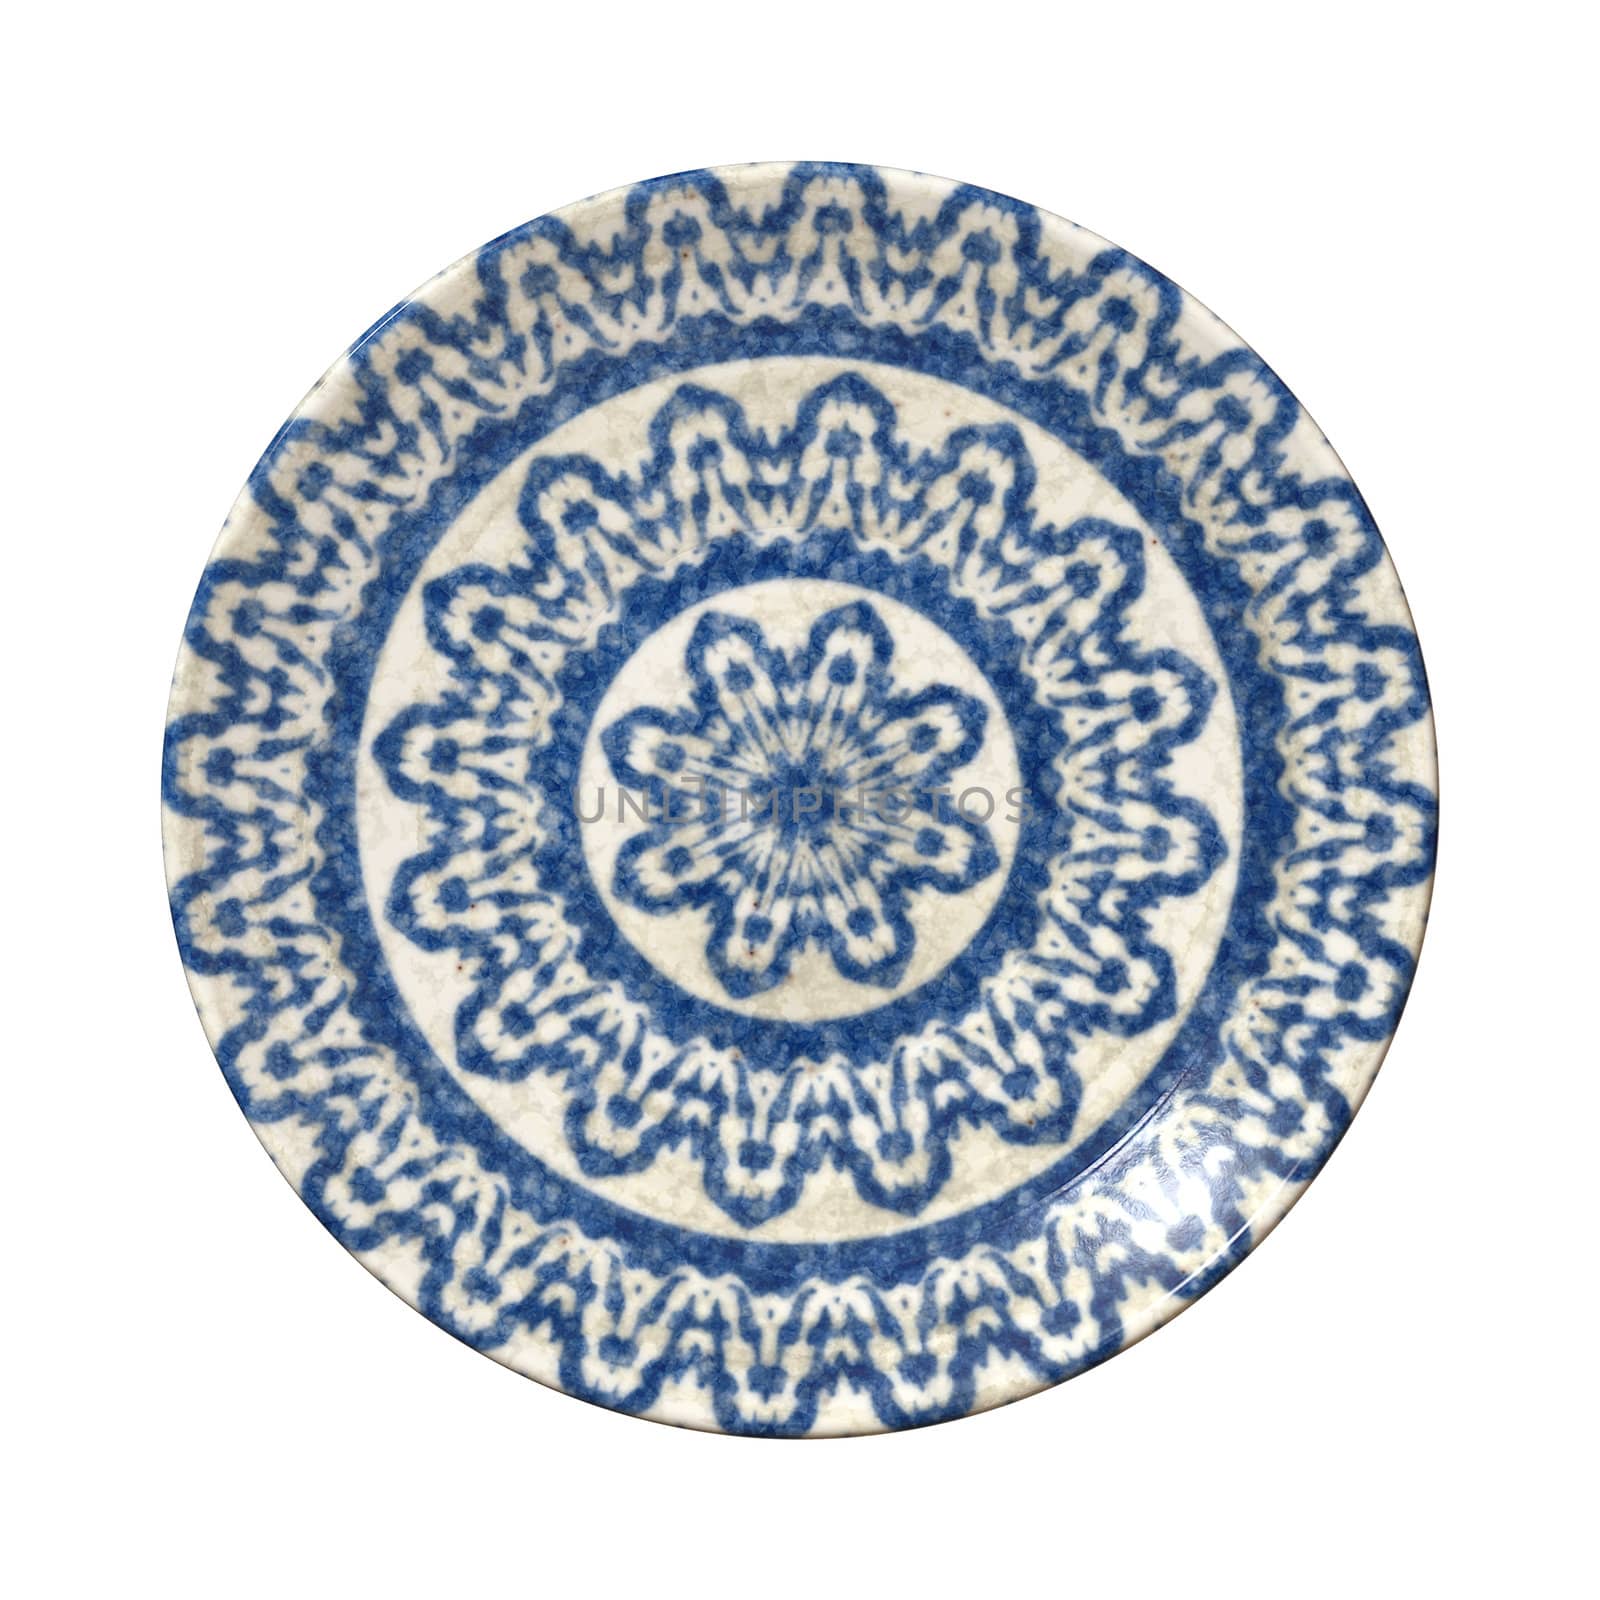 pottery plate by magann